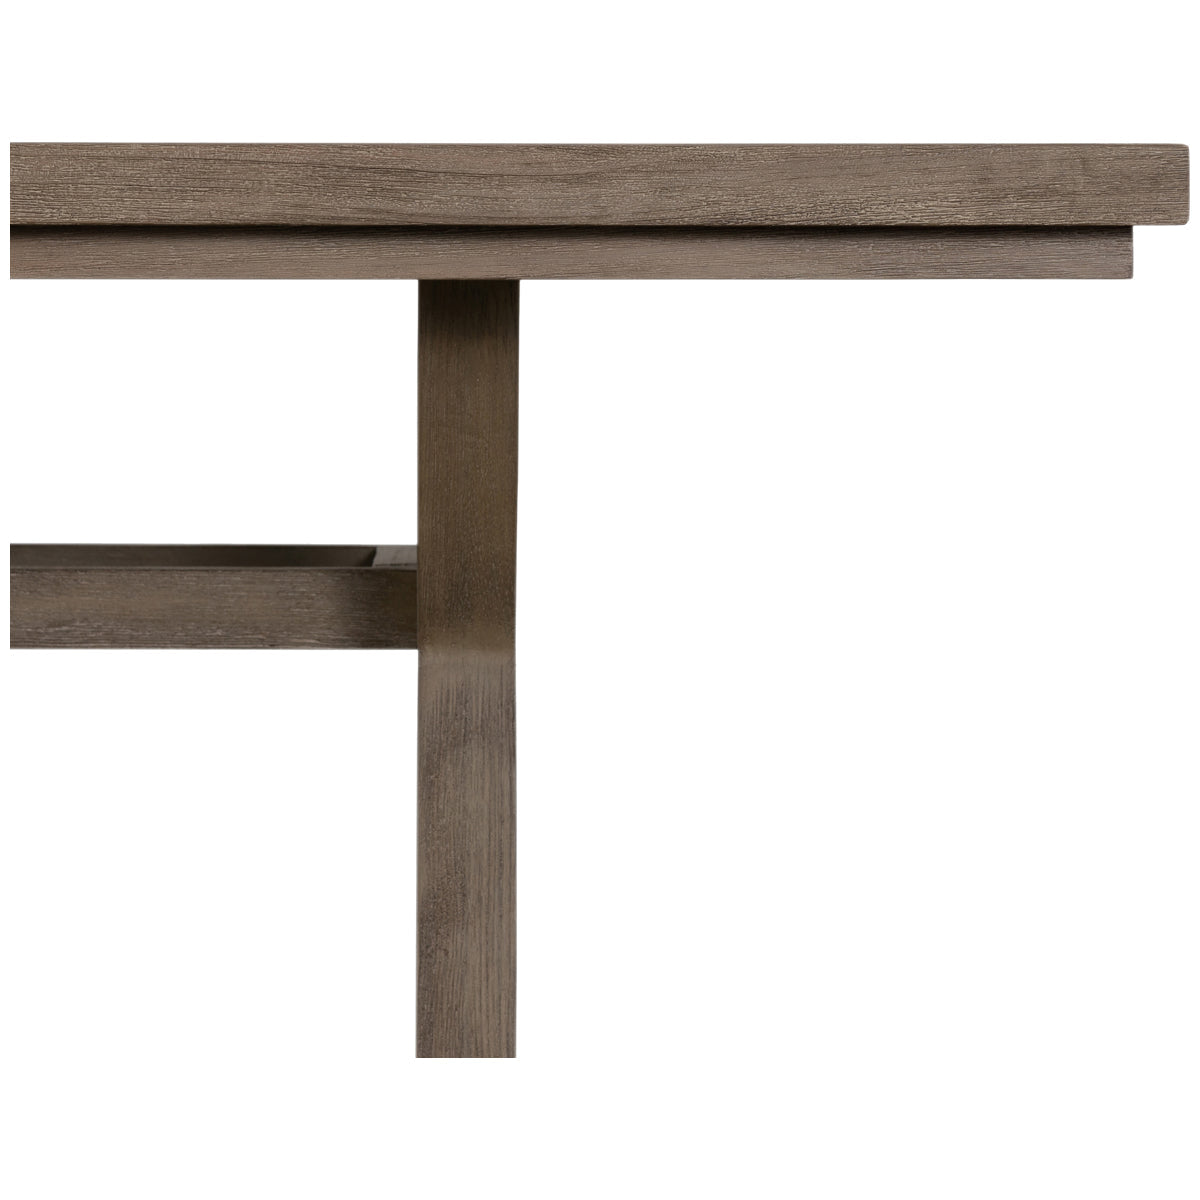 Four Hands Belfast Hoskin Outdoor Dining Table - Medium Weathered Grey